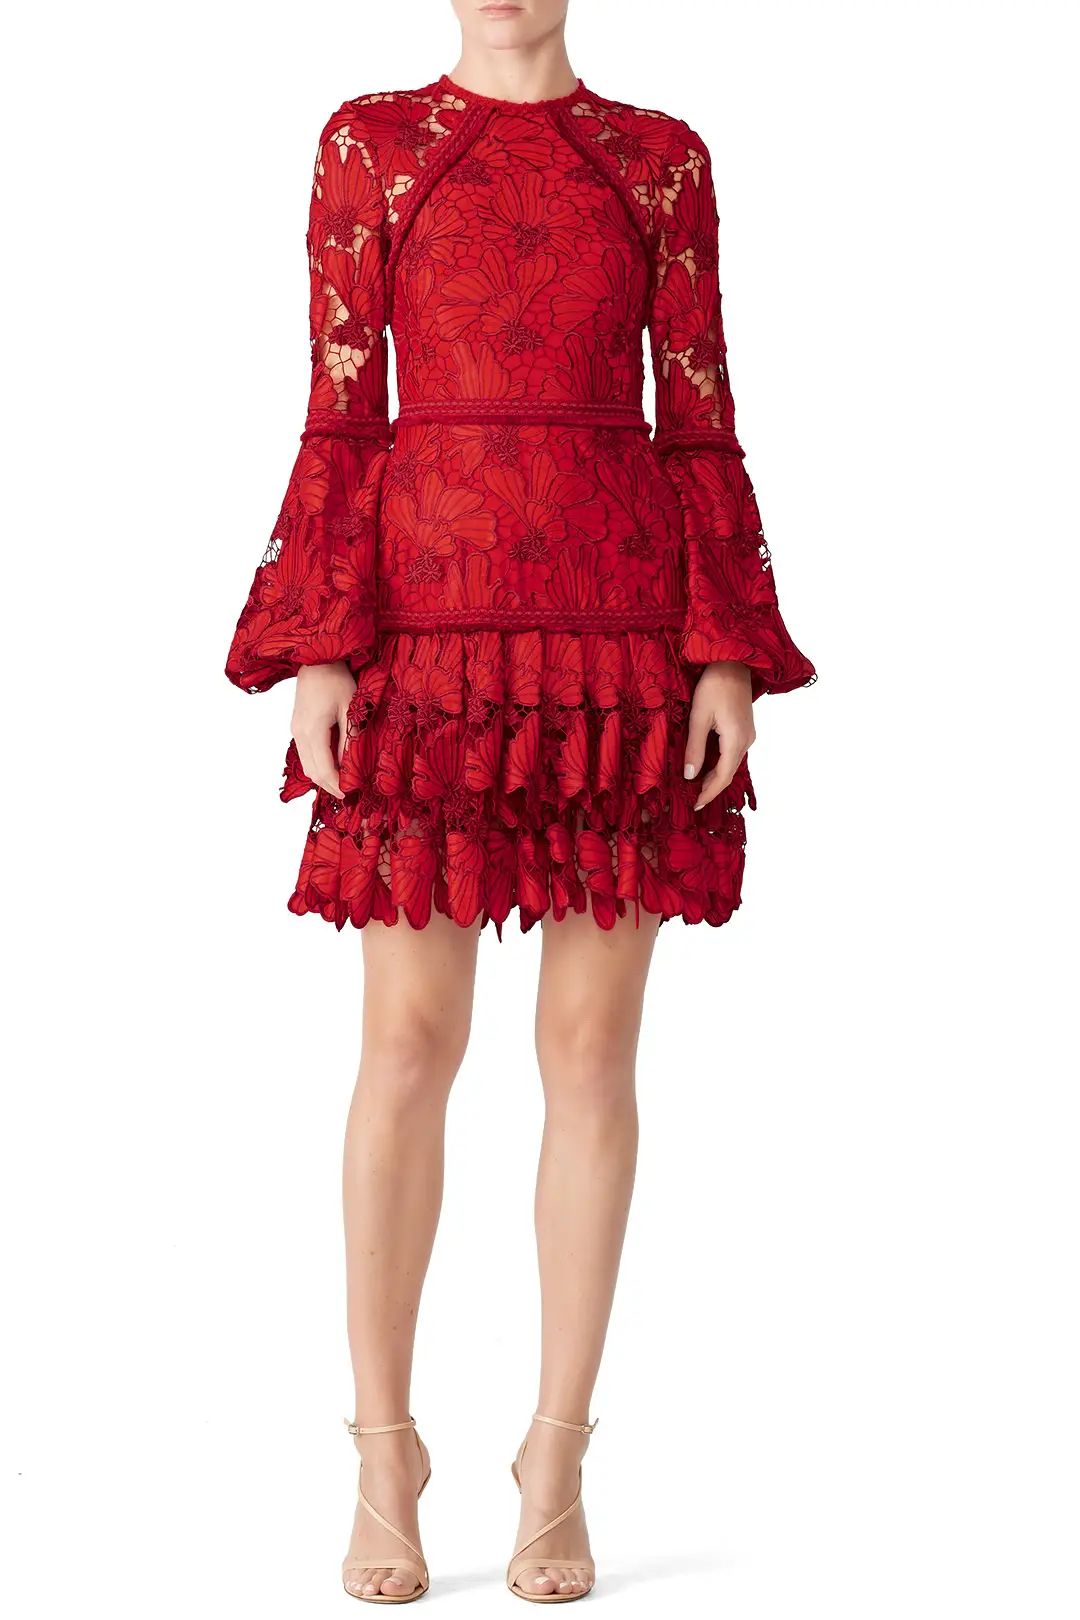 Alexis Red Lace Fransisca Dress | Rent The Runway